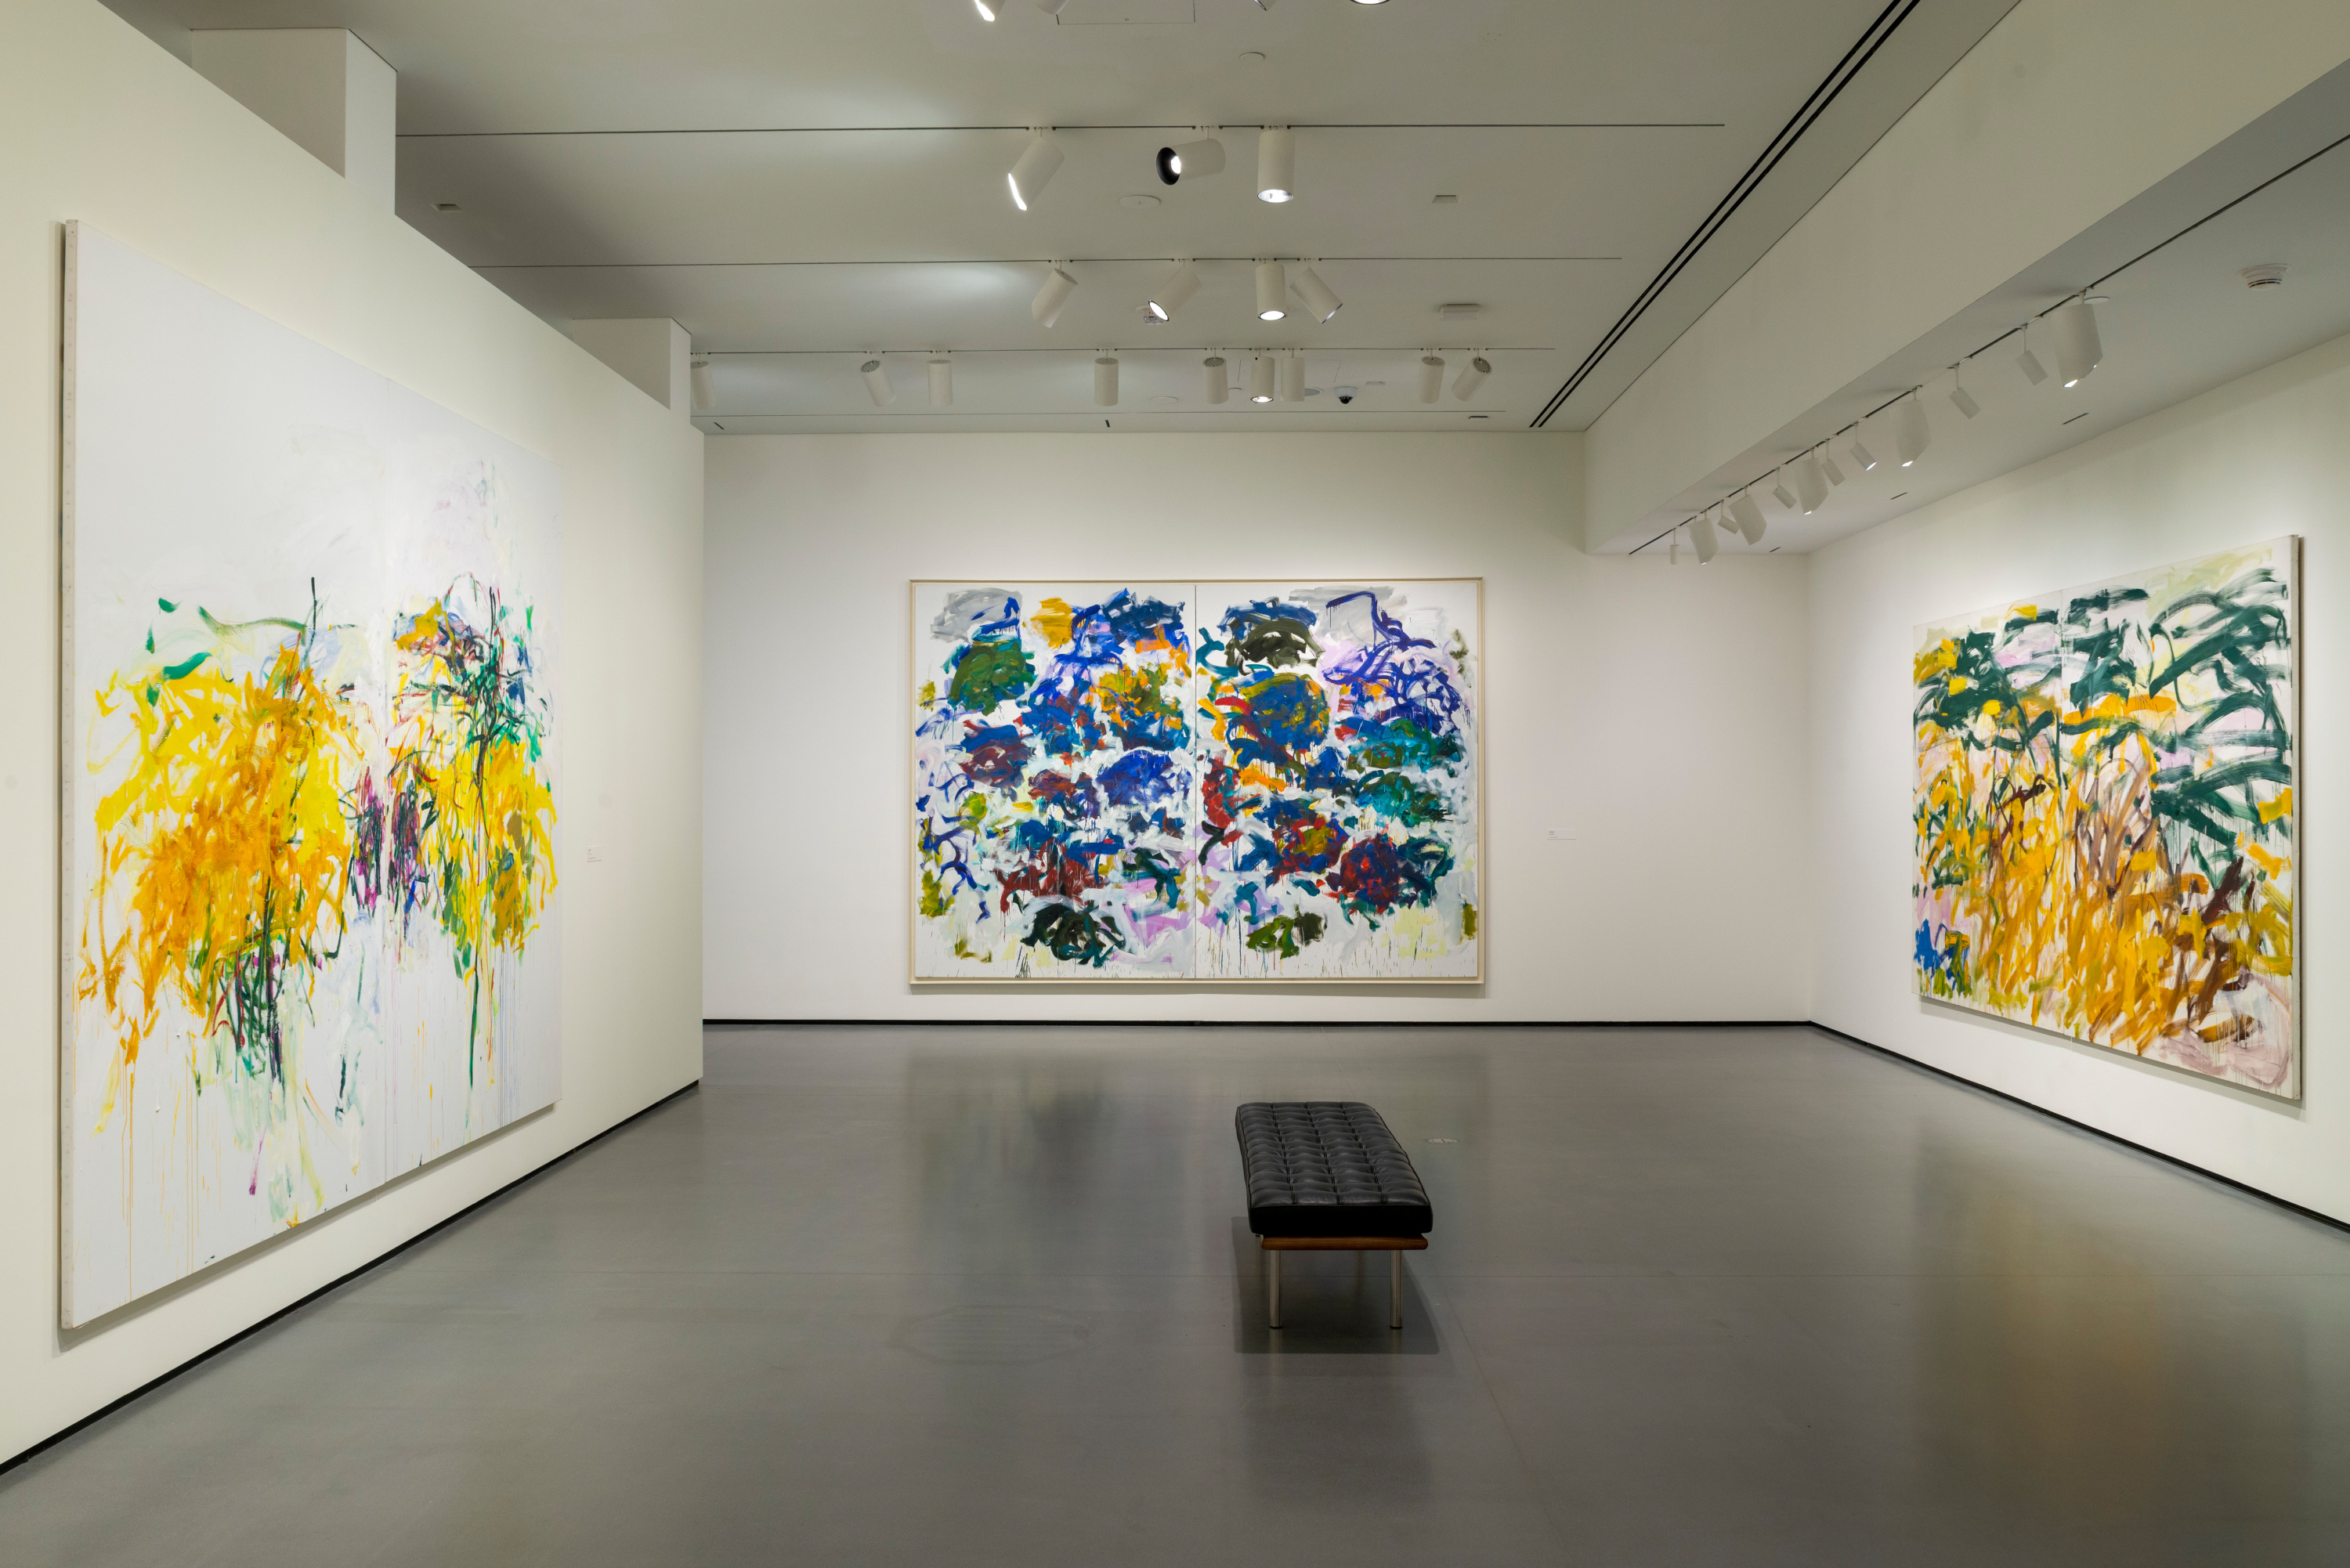 Installation view of the Joan Mitchell exhibit. Image courtesy of the Baltimore Museum of Art